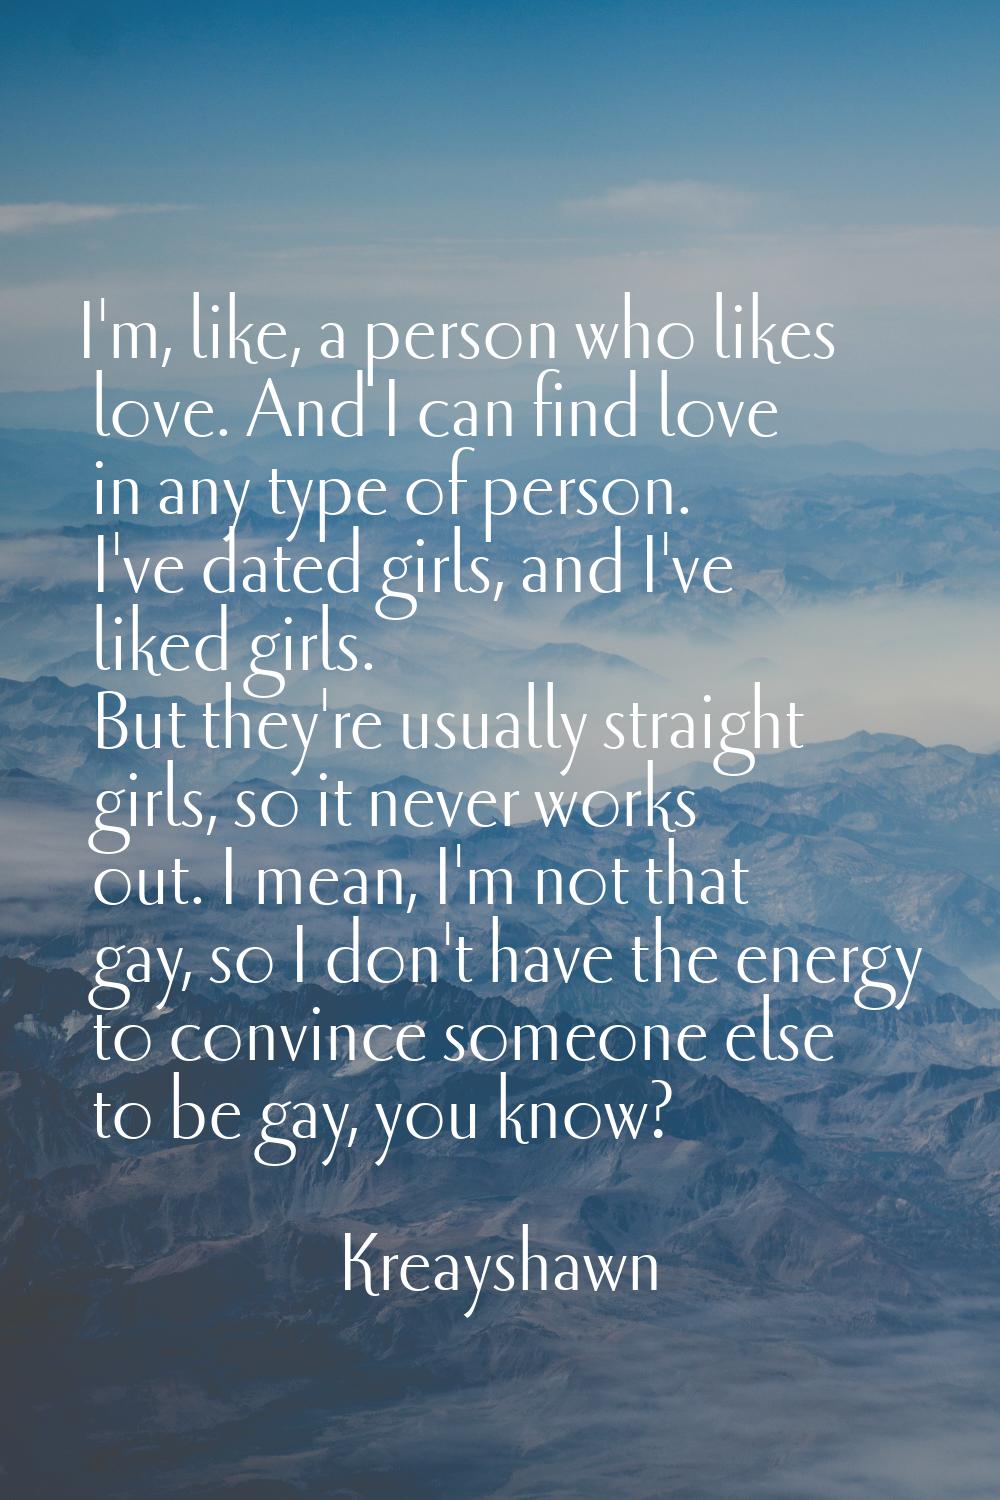 I'm, like, a person who likes love. And I can find love in any type of person. I've dated girls, an